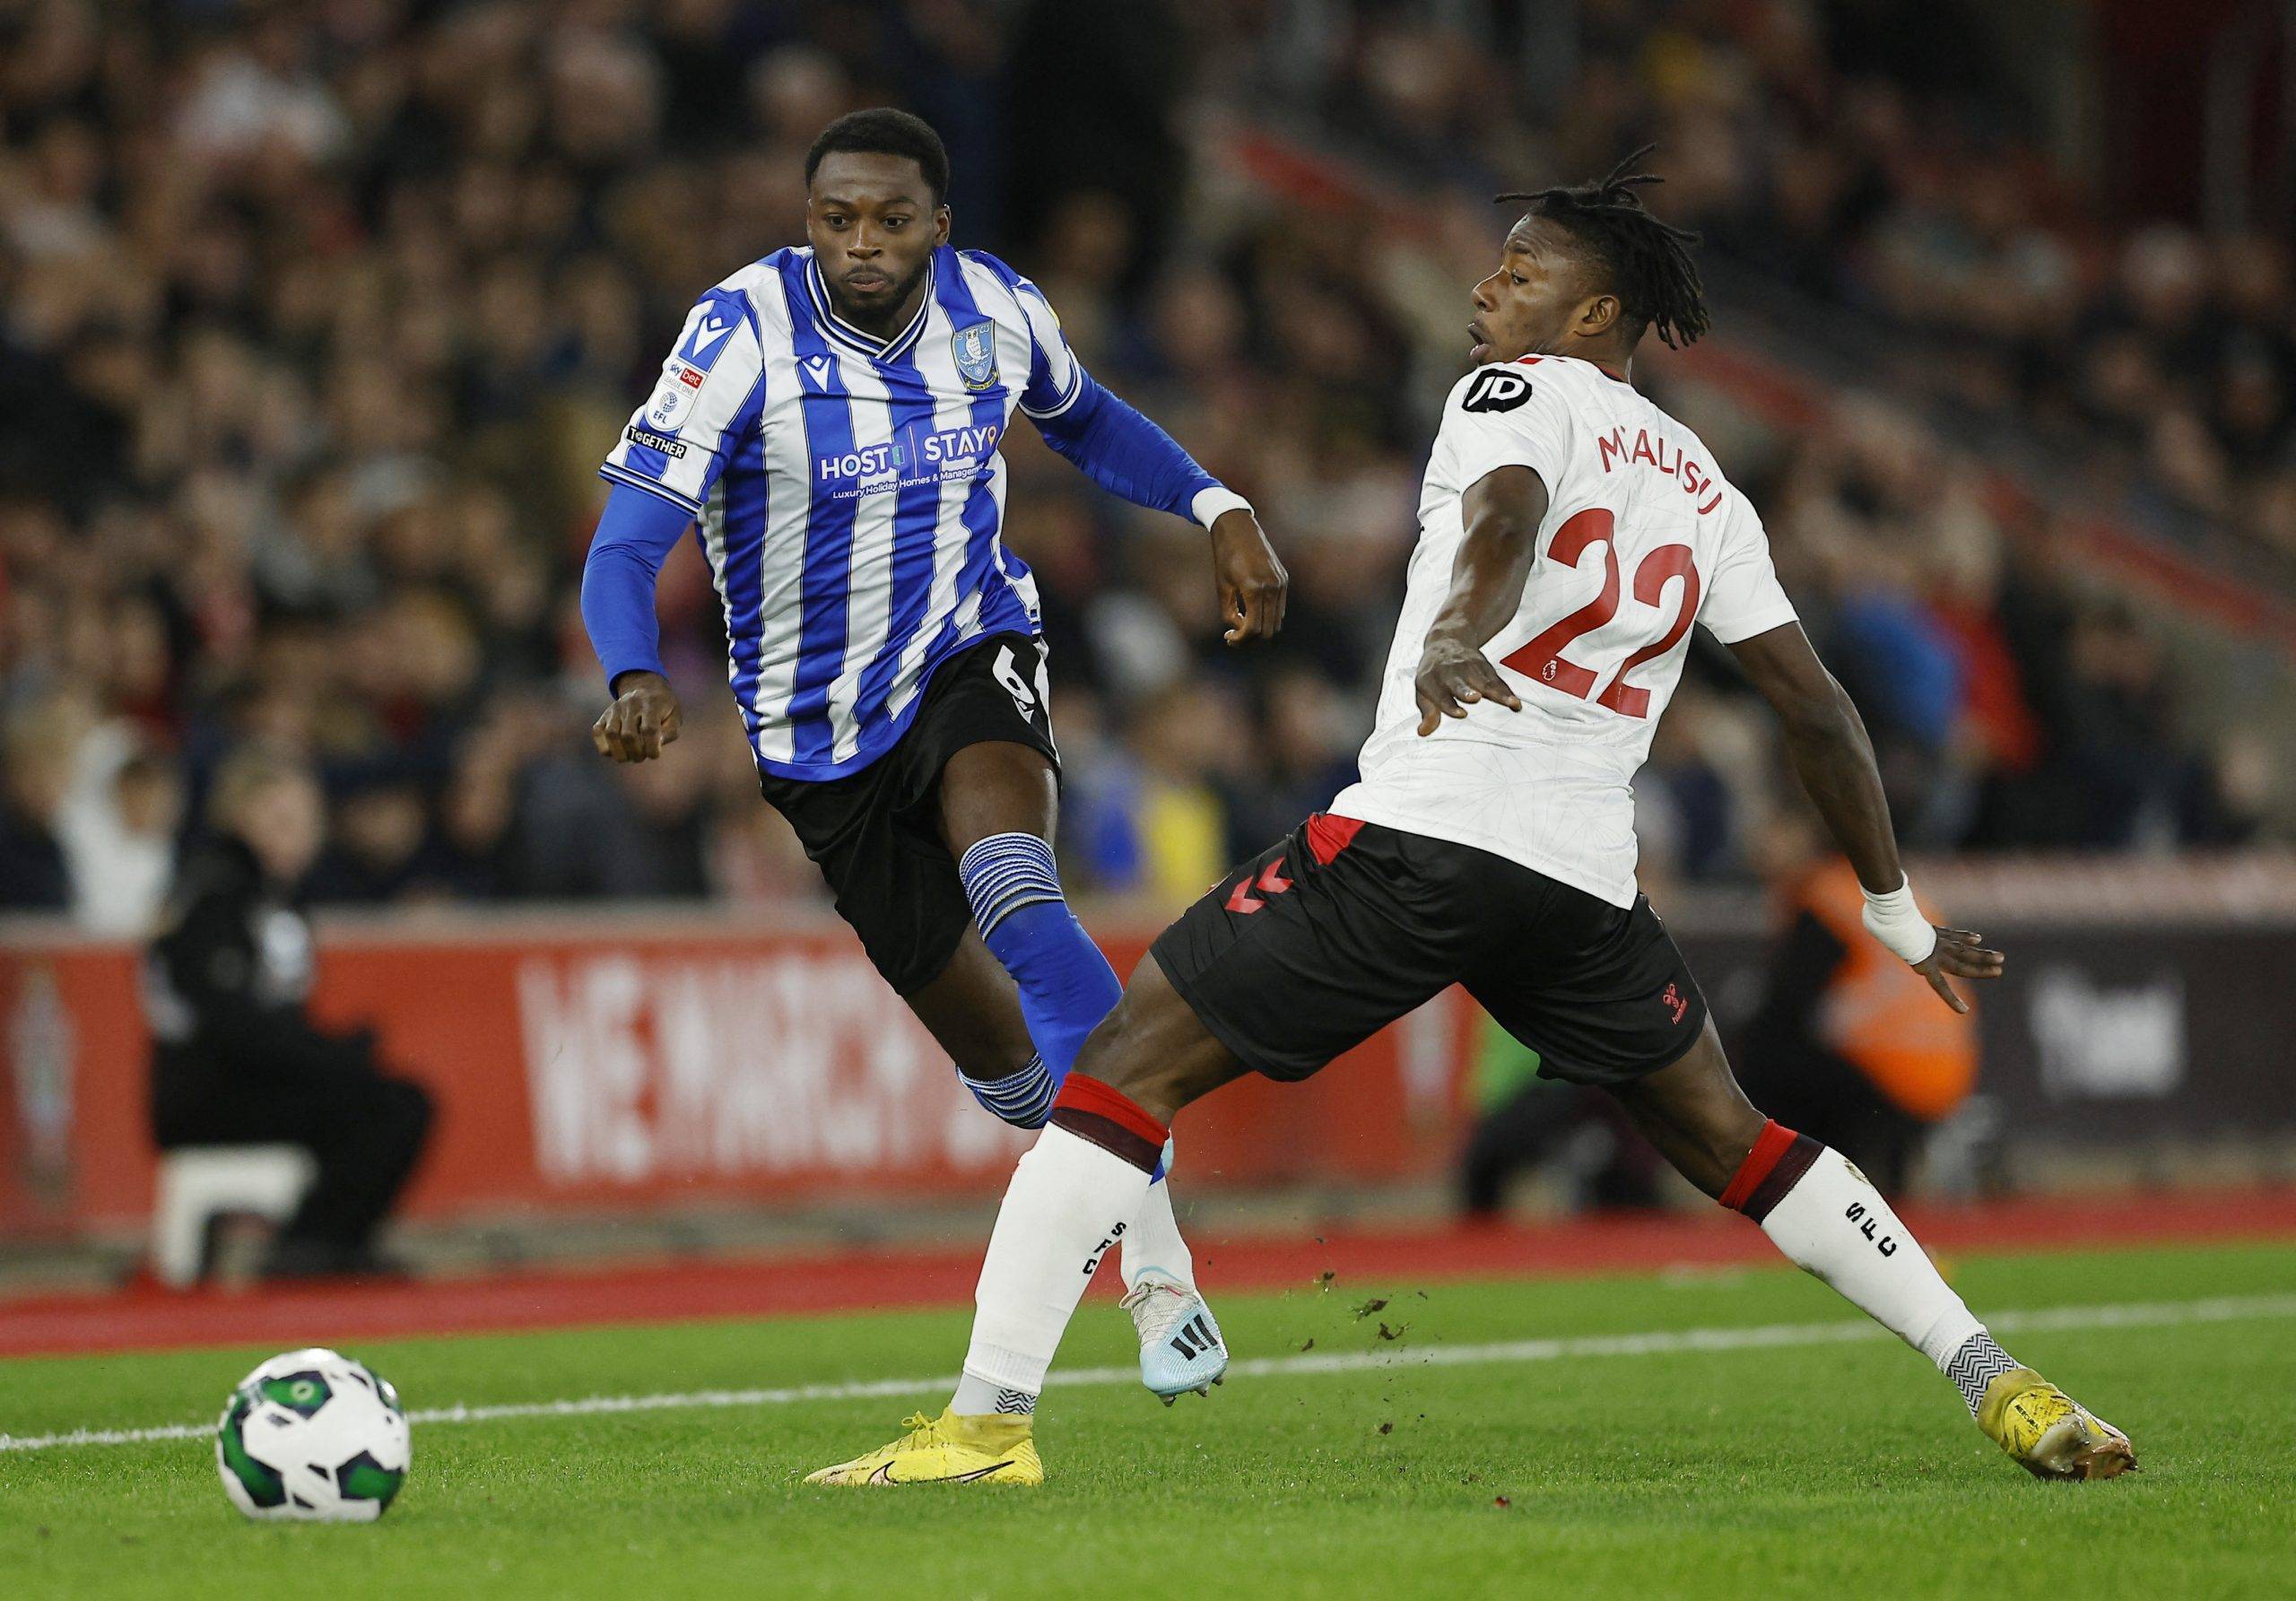 Sheffield Wednesday: Dominic Iorfa injury is a 'blow' - League One News